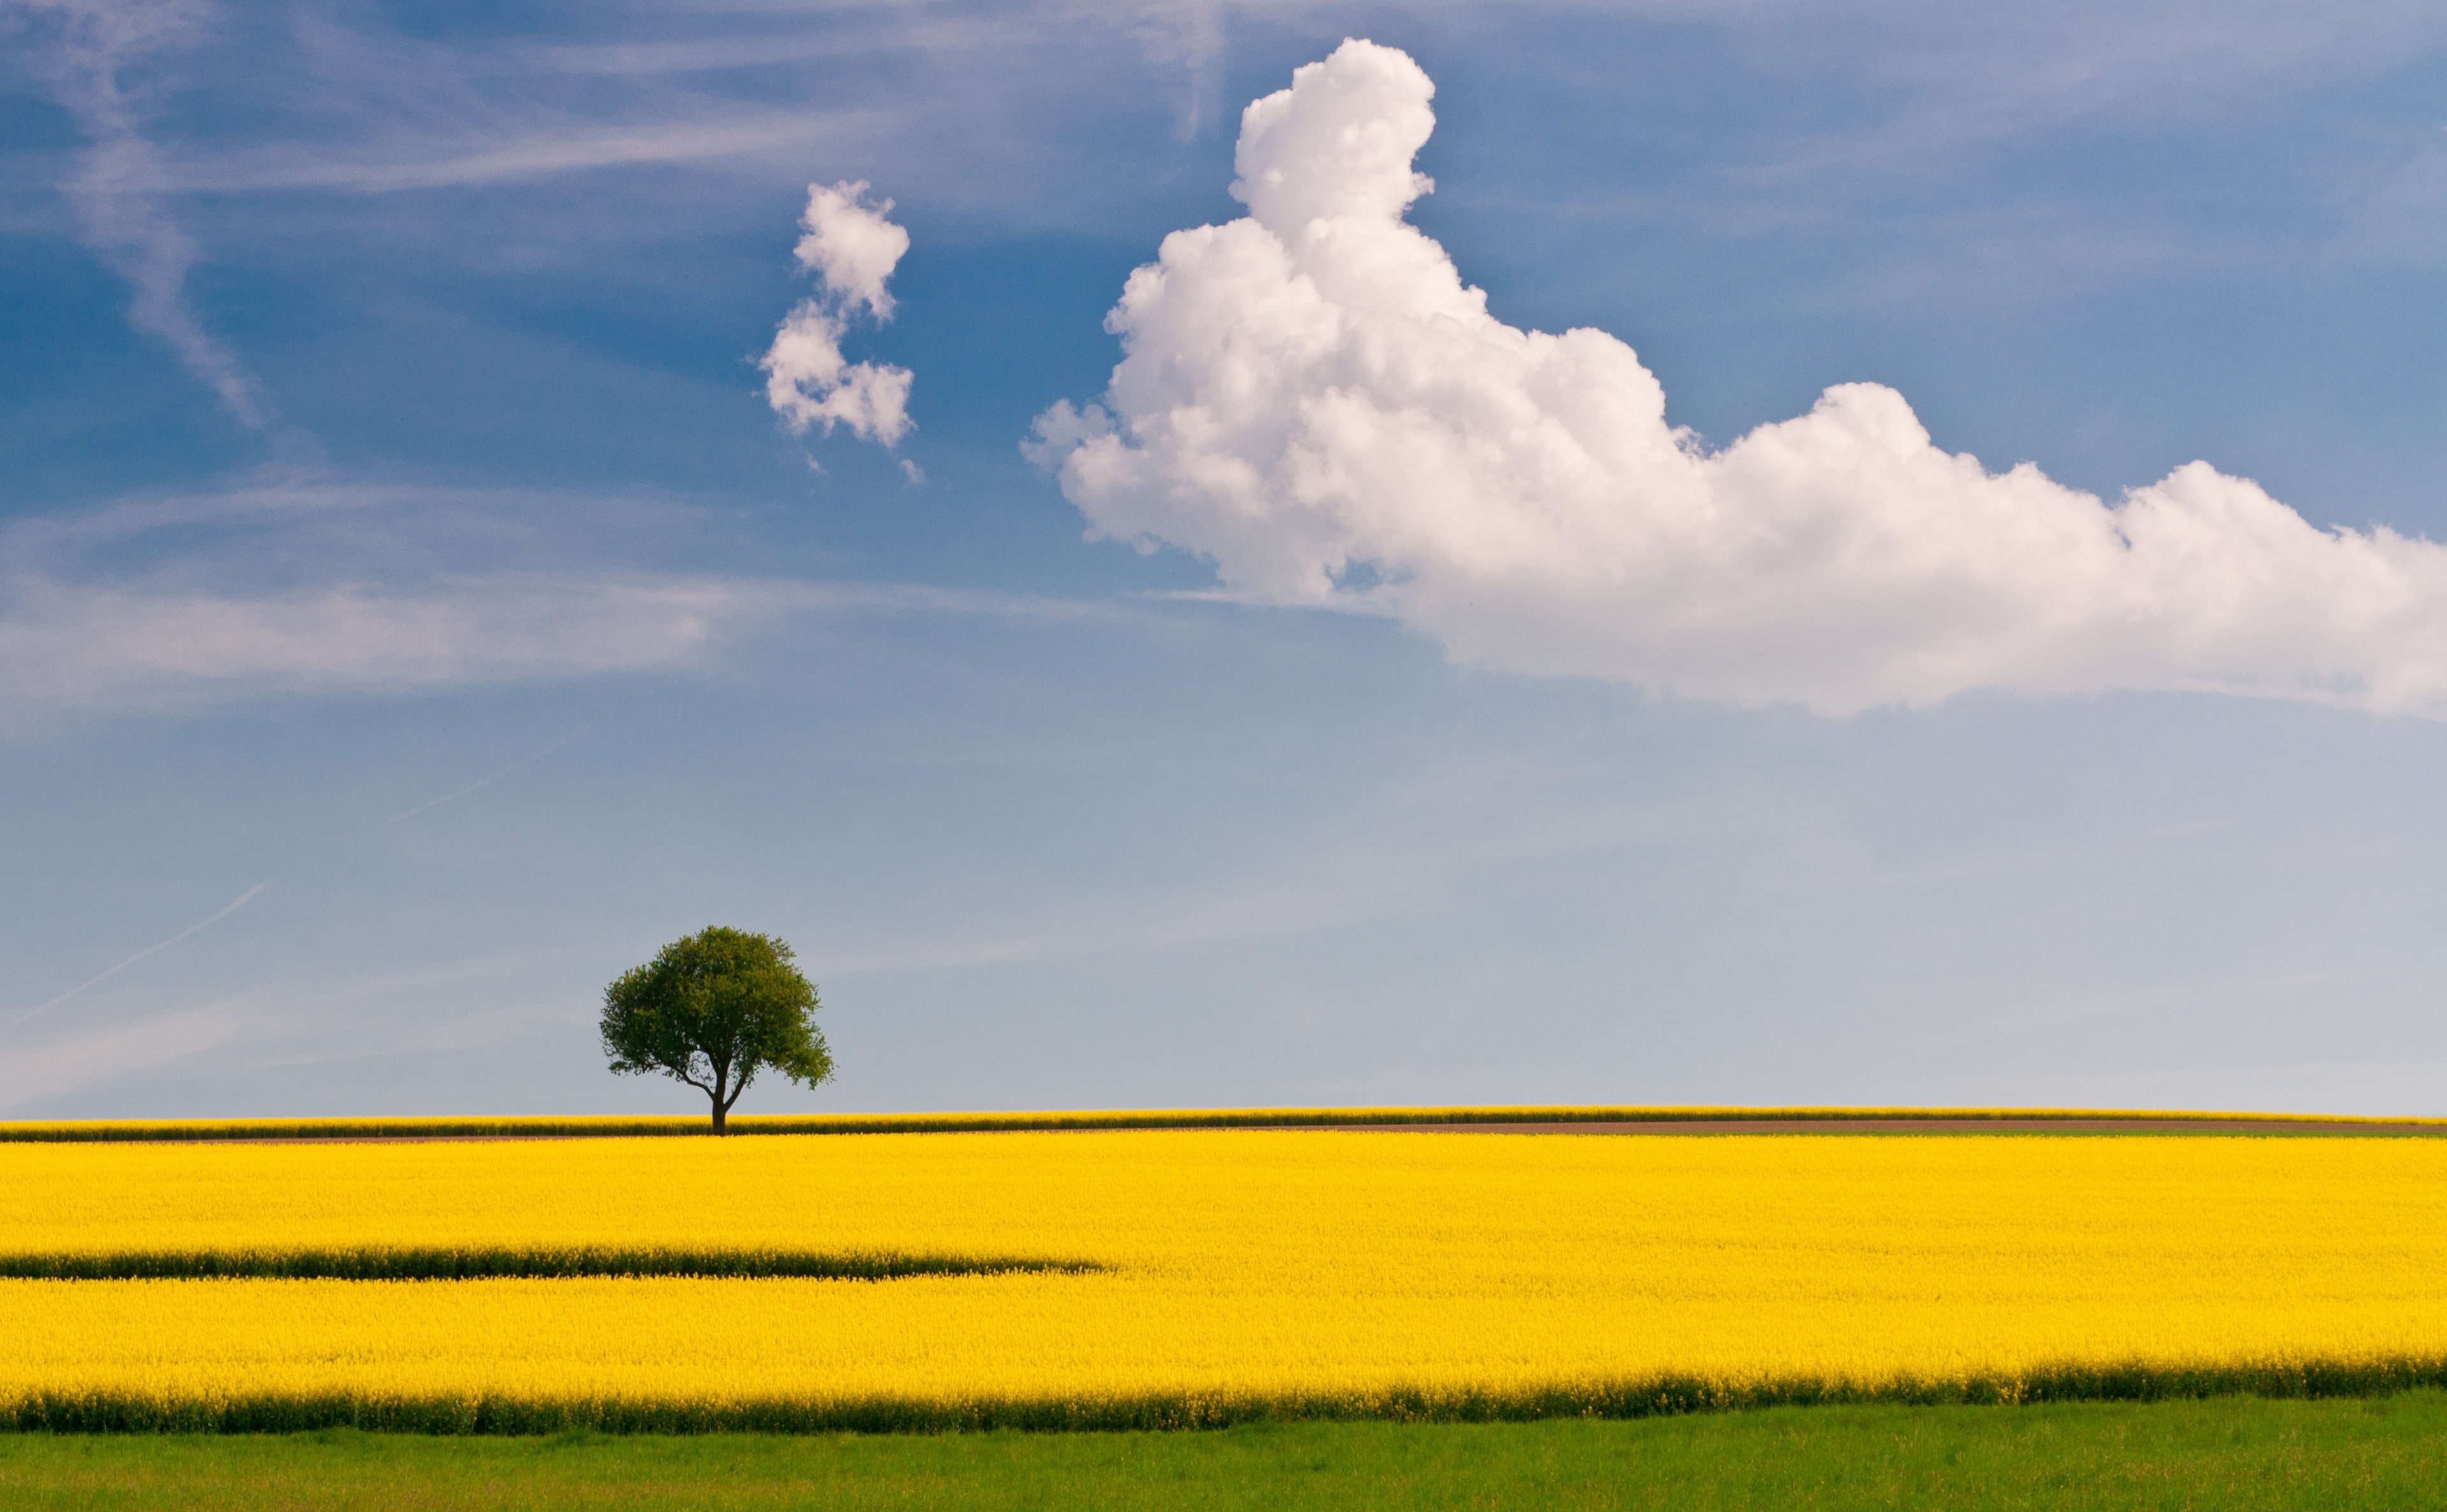 Rape Field and Tree, green leafed tree, Nature, Landscape, Blue